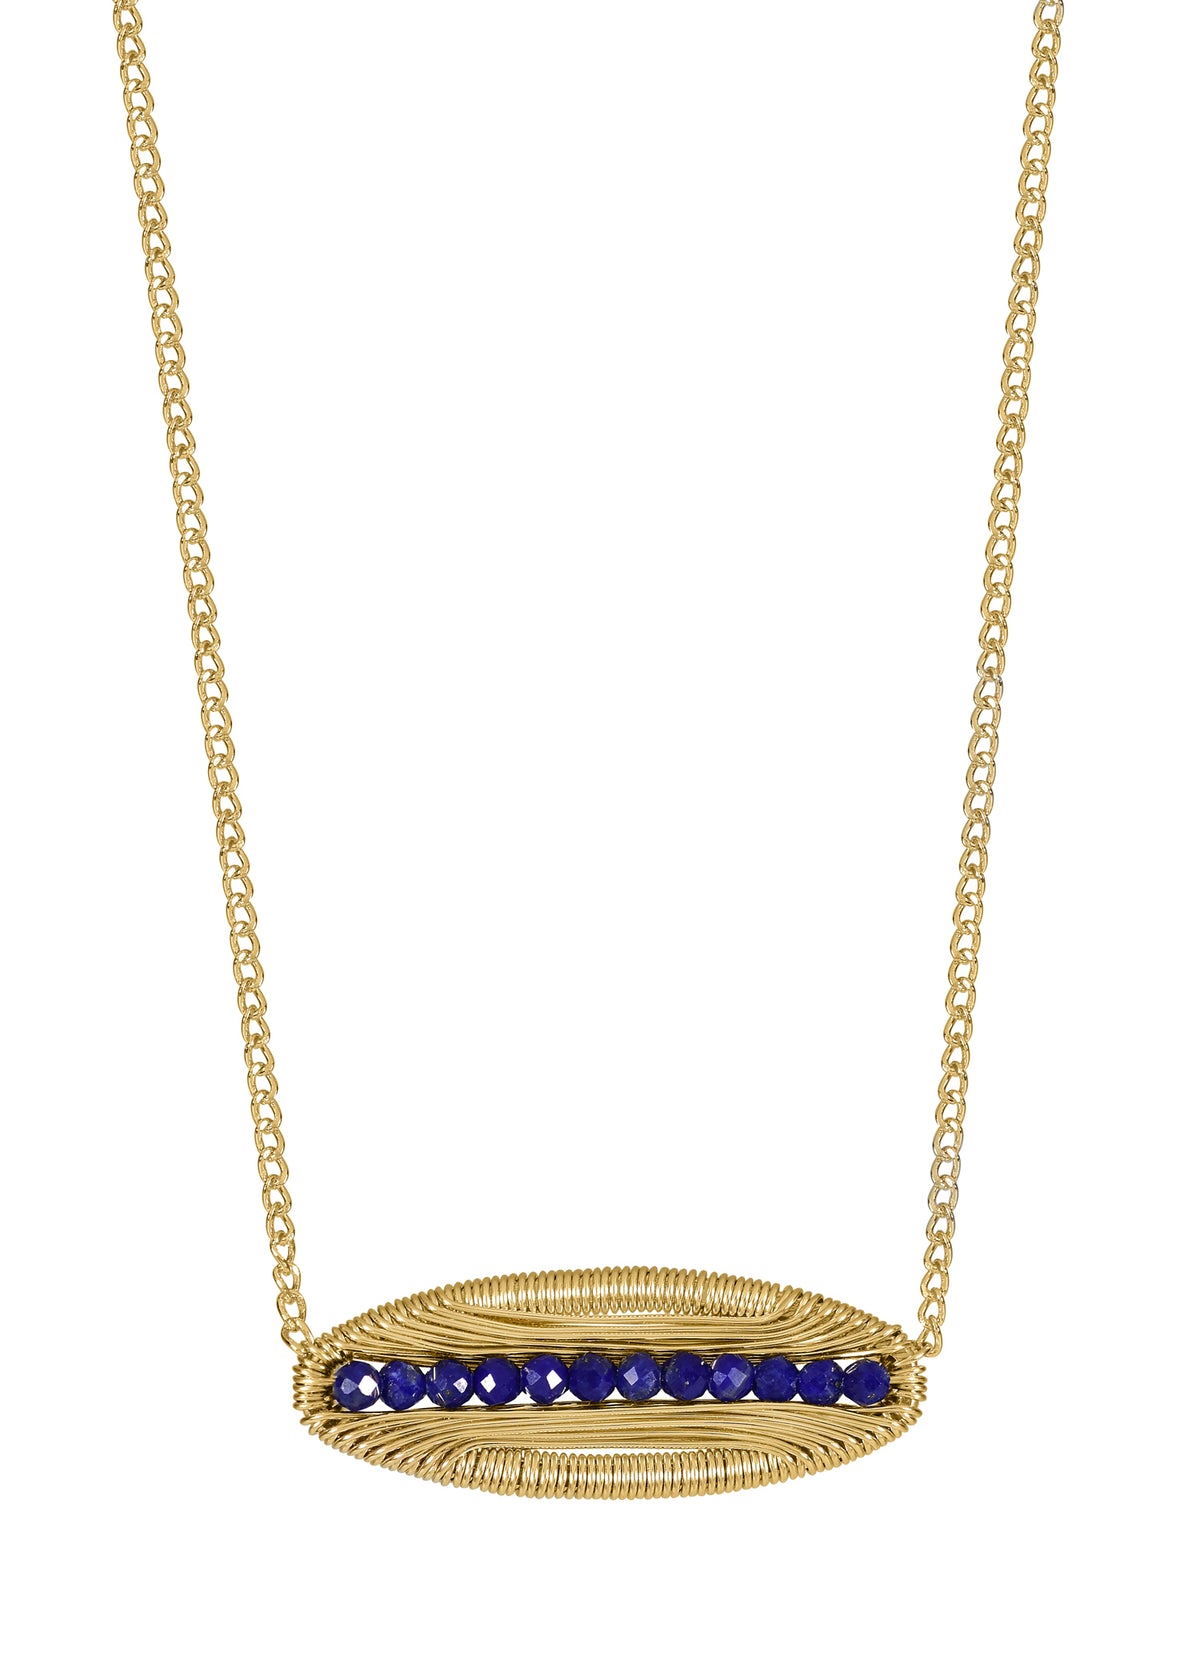 Blue lapis 14k gold fill Necklace measures 16&quot; in length Pendant measures 5/16&quot; in length and 7/8&quot; in width Handmade in our Los Angeles studio